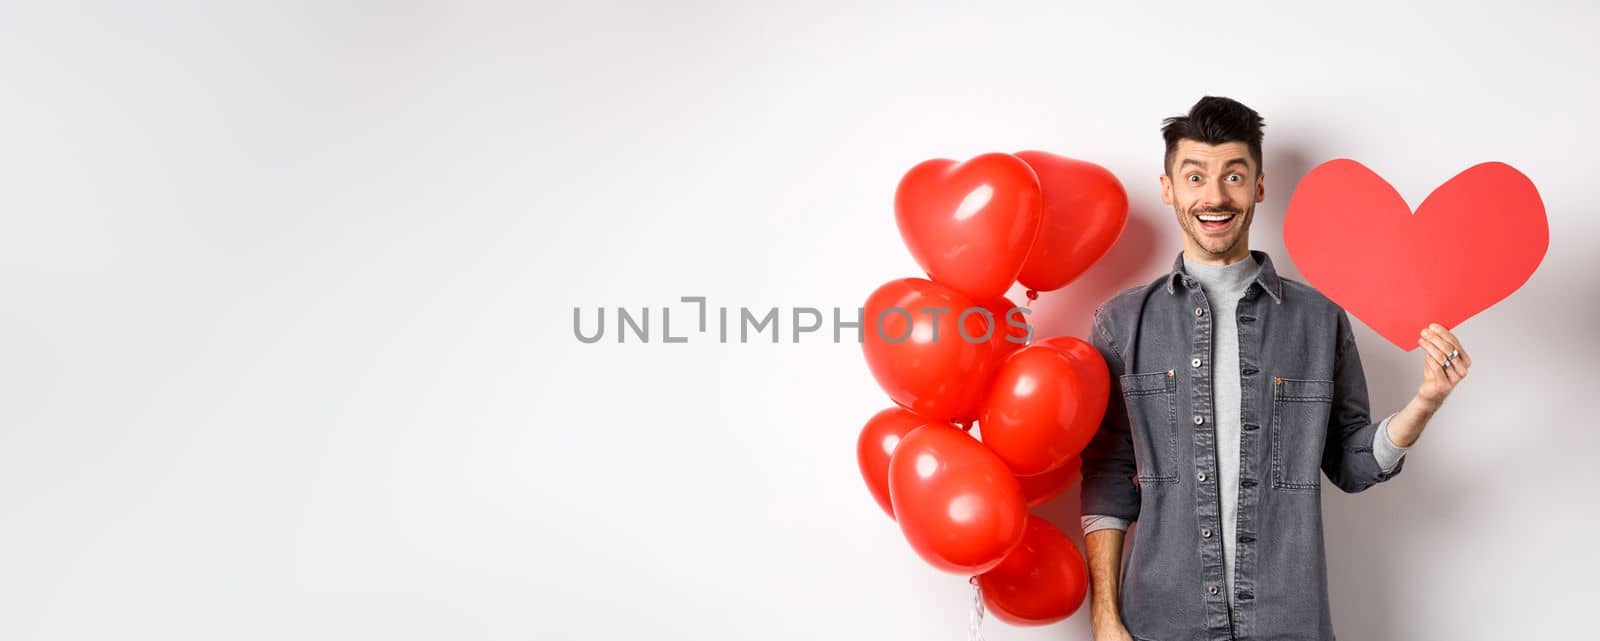 Valentines day and love concept. Cheerful funny guy showing heart cutout, standing near romantic balloons and smiling excited at camera, white background.